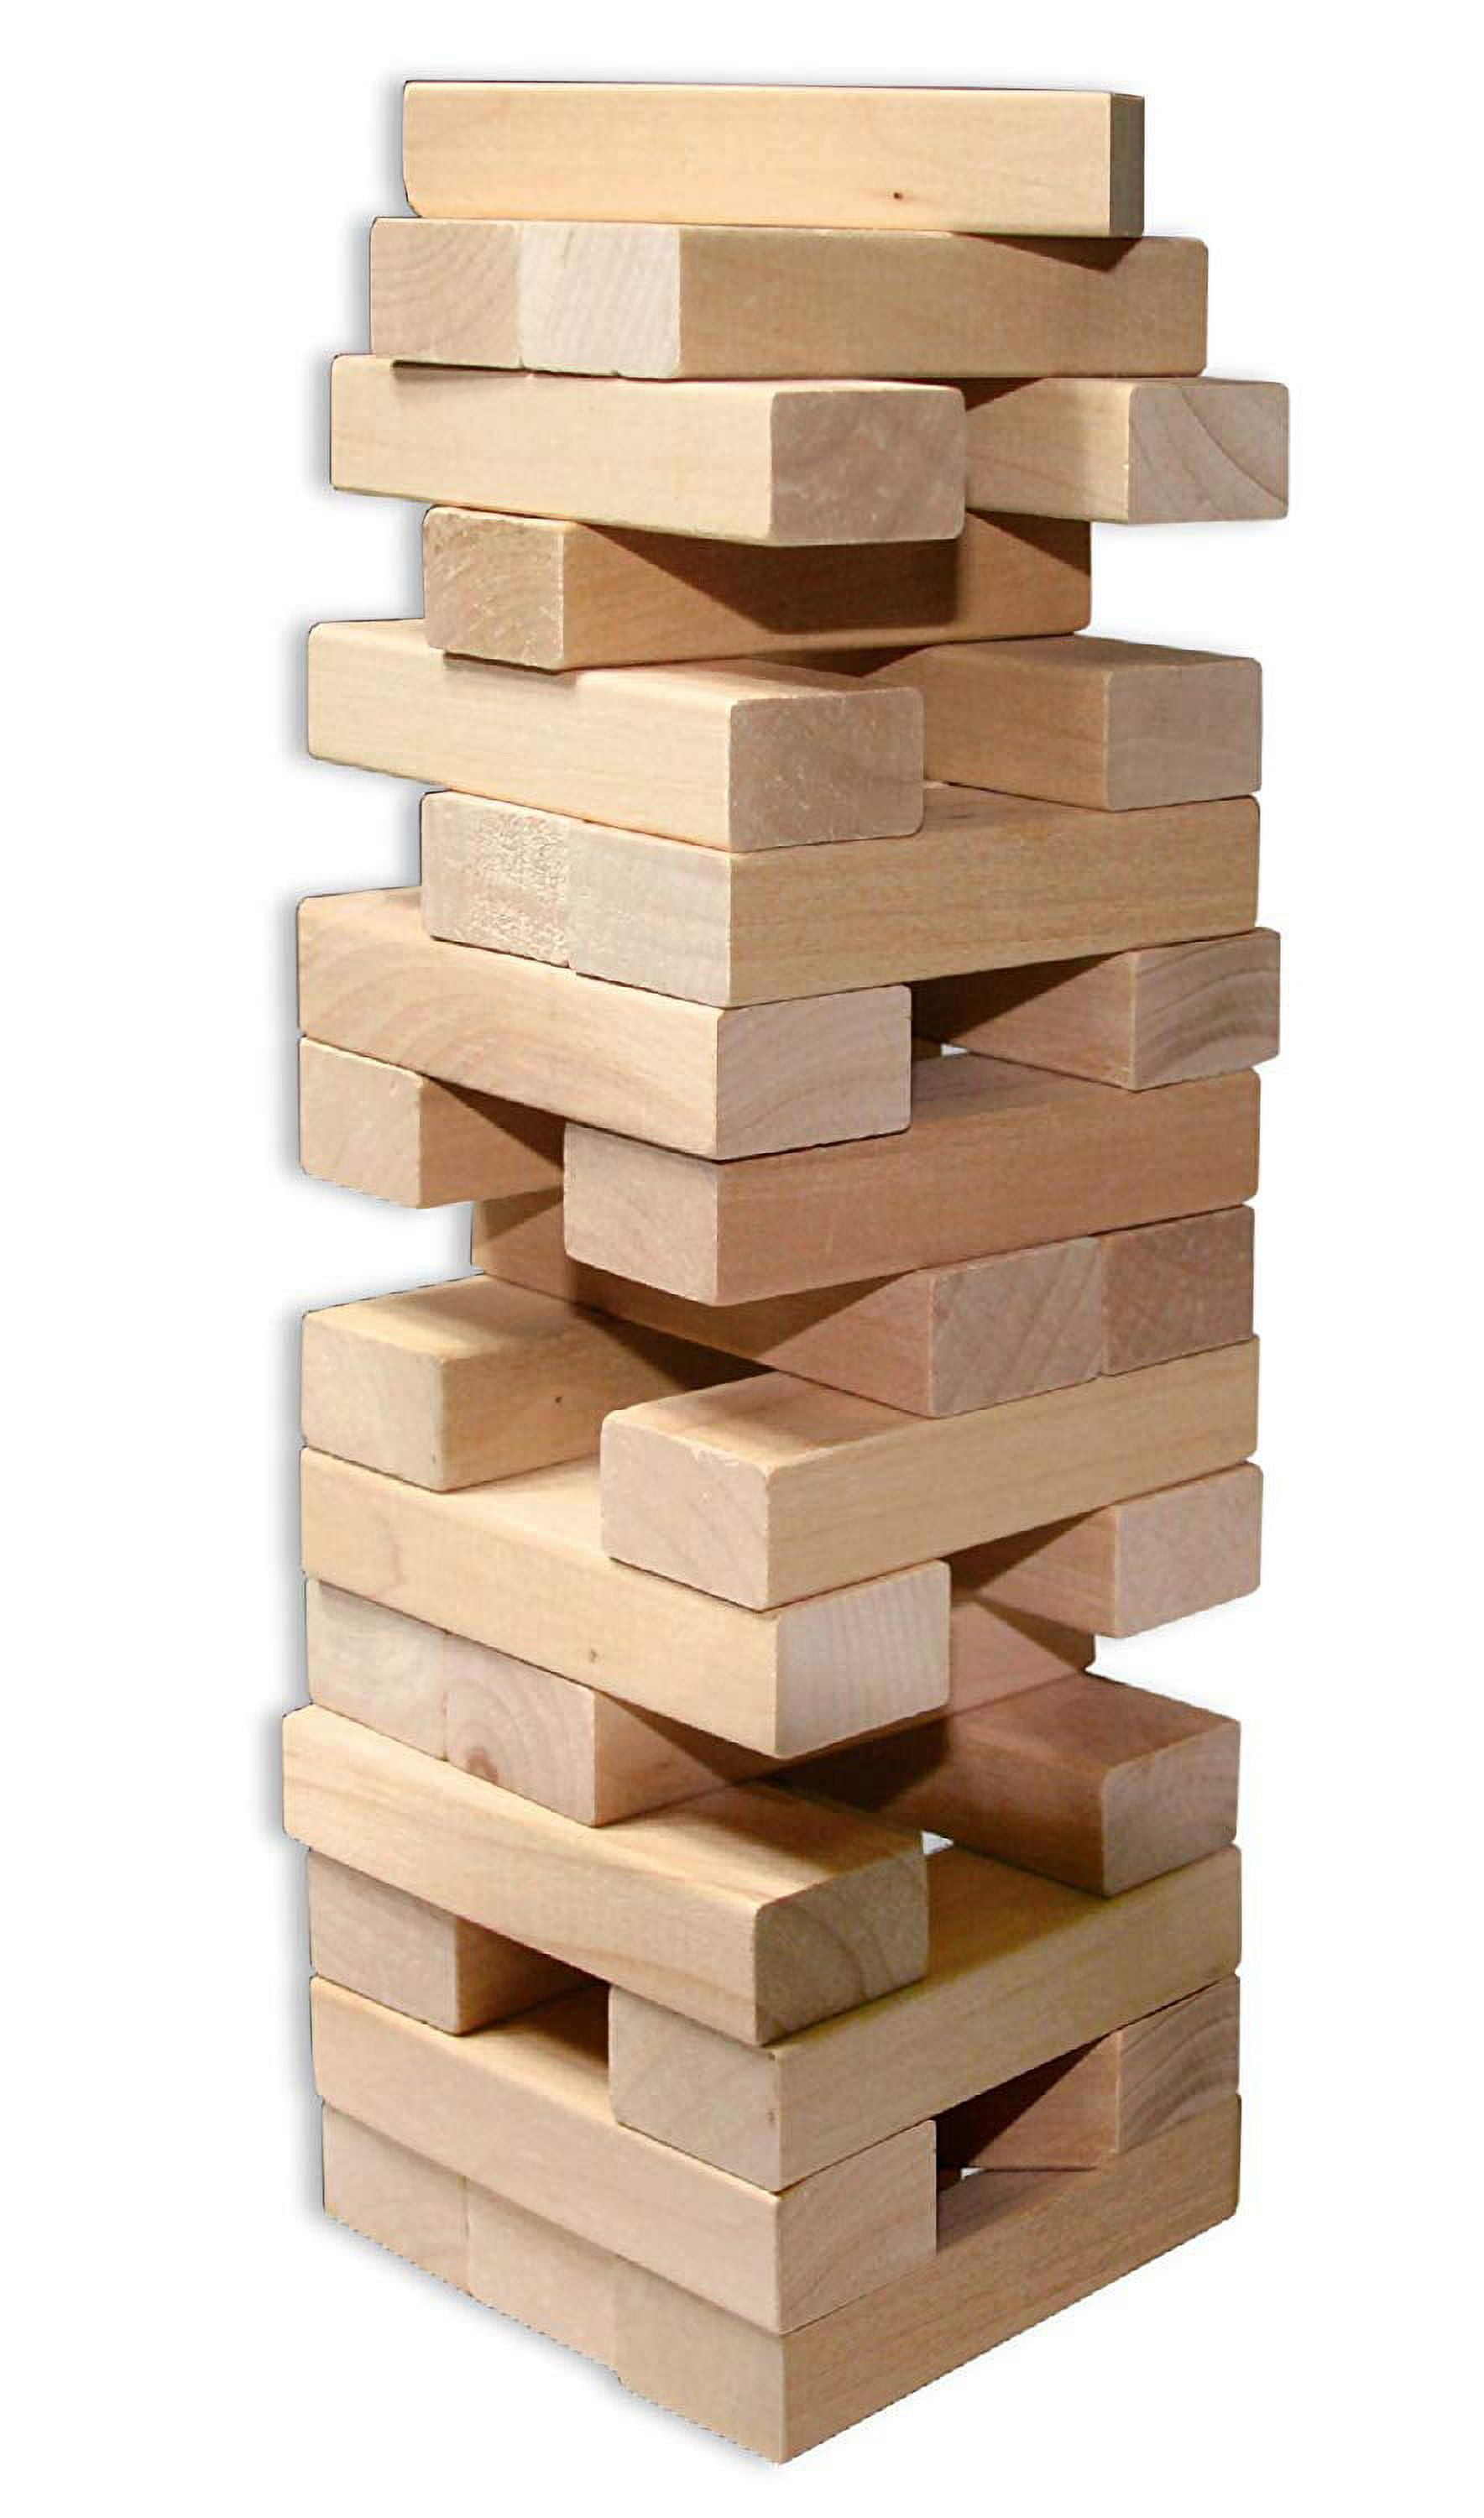  CoolToys Timber Tower Wood Block Stacking Game – Original  Edition (48 Pieces) : Toys & Games